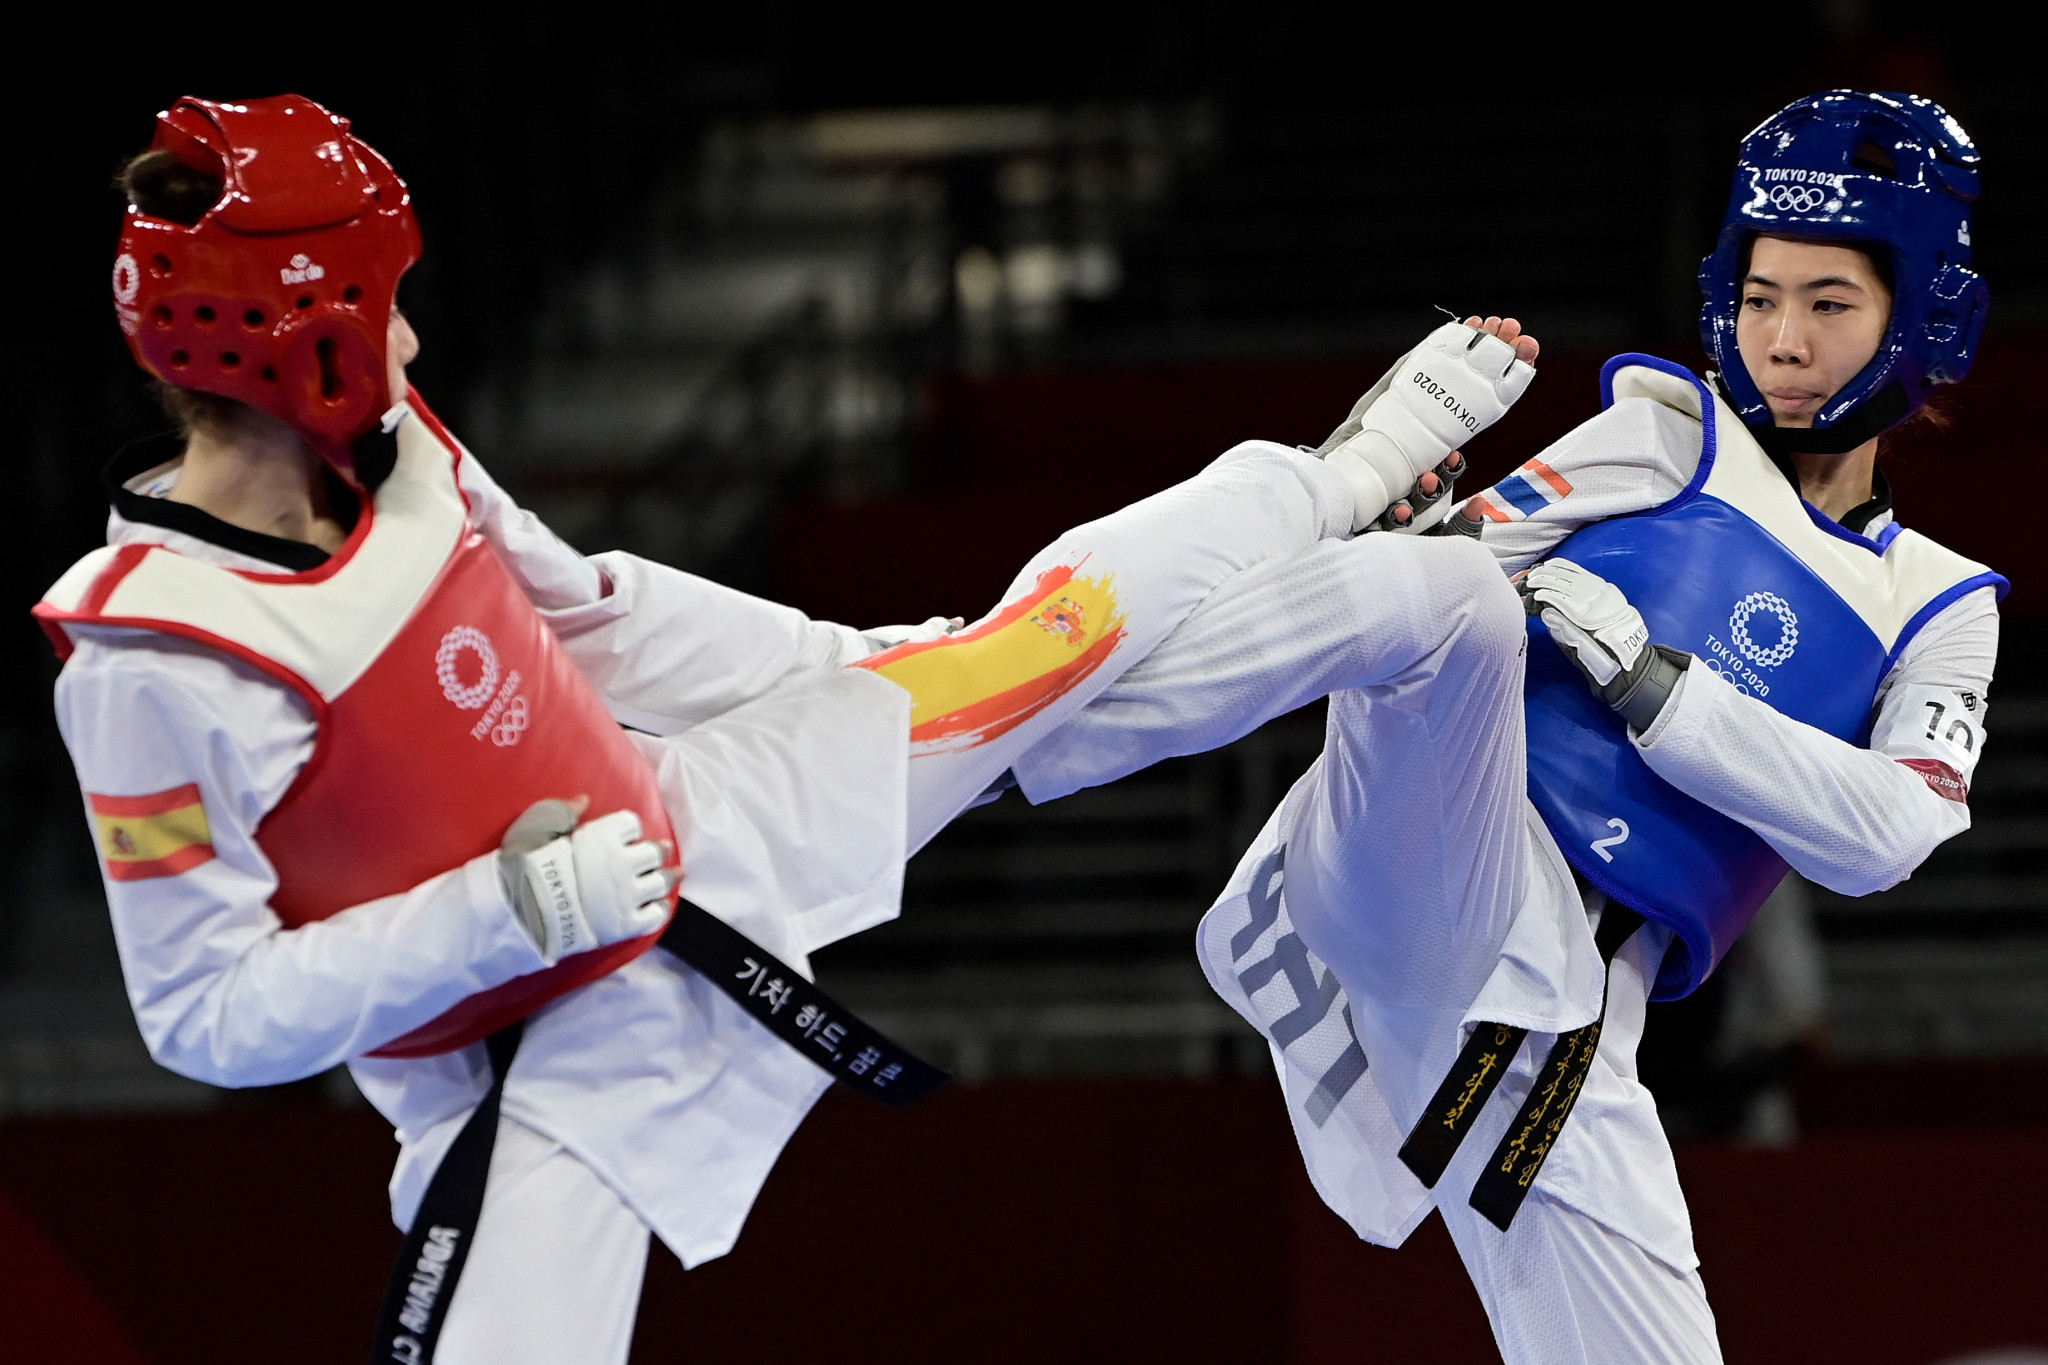 Spanish taekwondo is holding the event to support people from Ukraine ©Getty Images